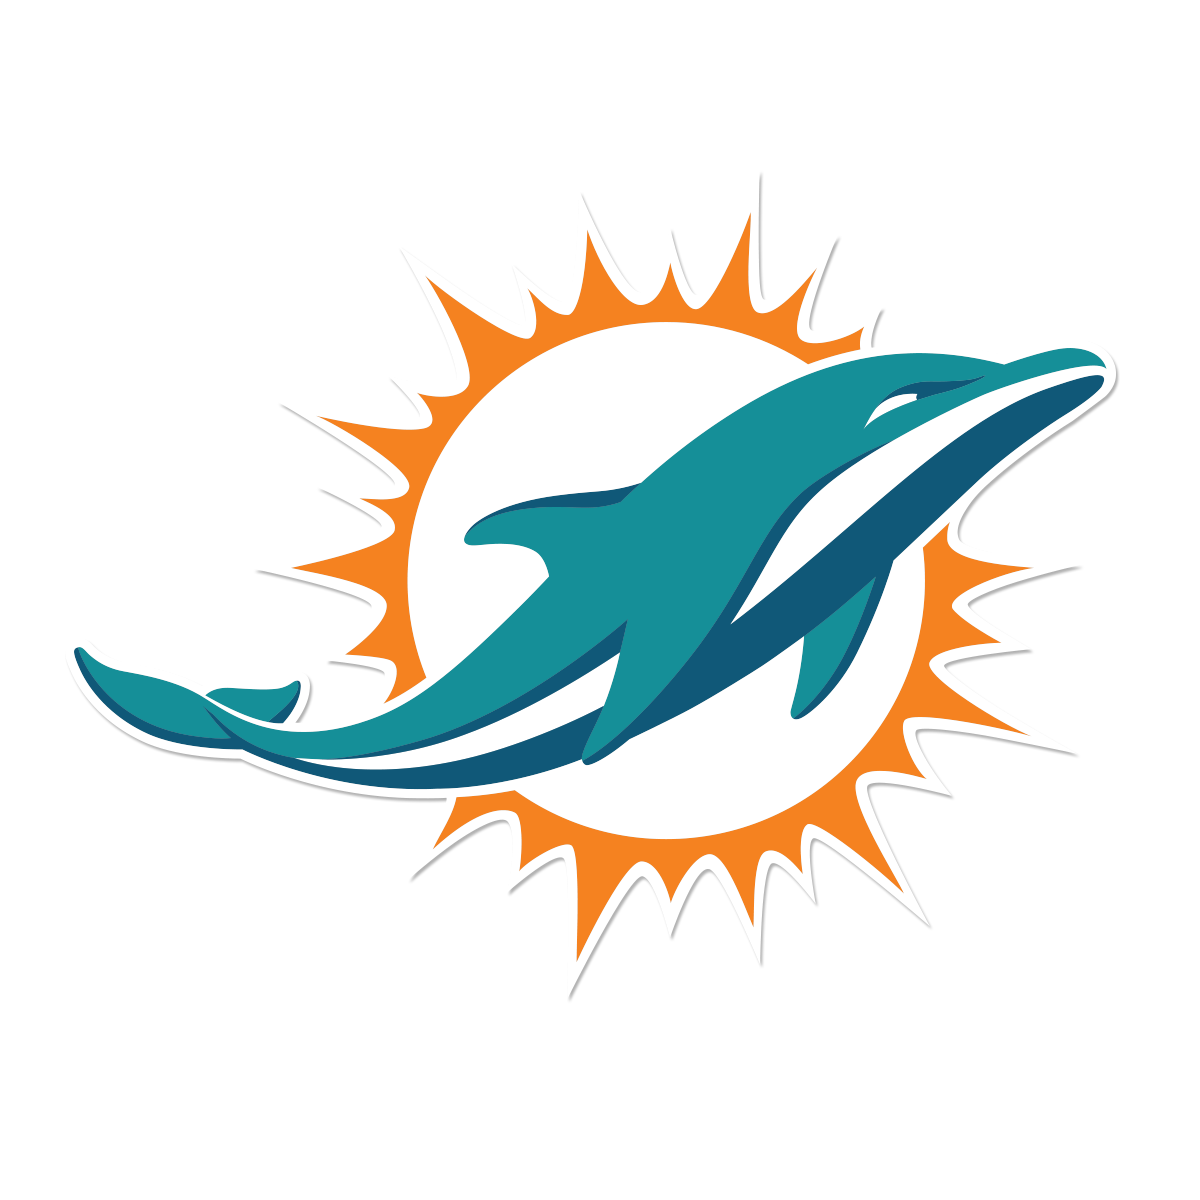 Miami Dolphins offer free youth clinic for boys and girls ages 6 to 14